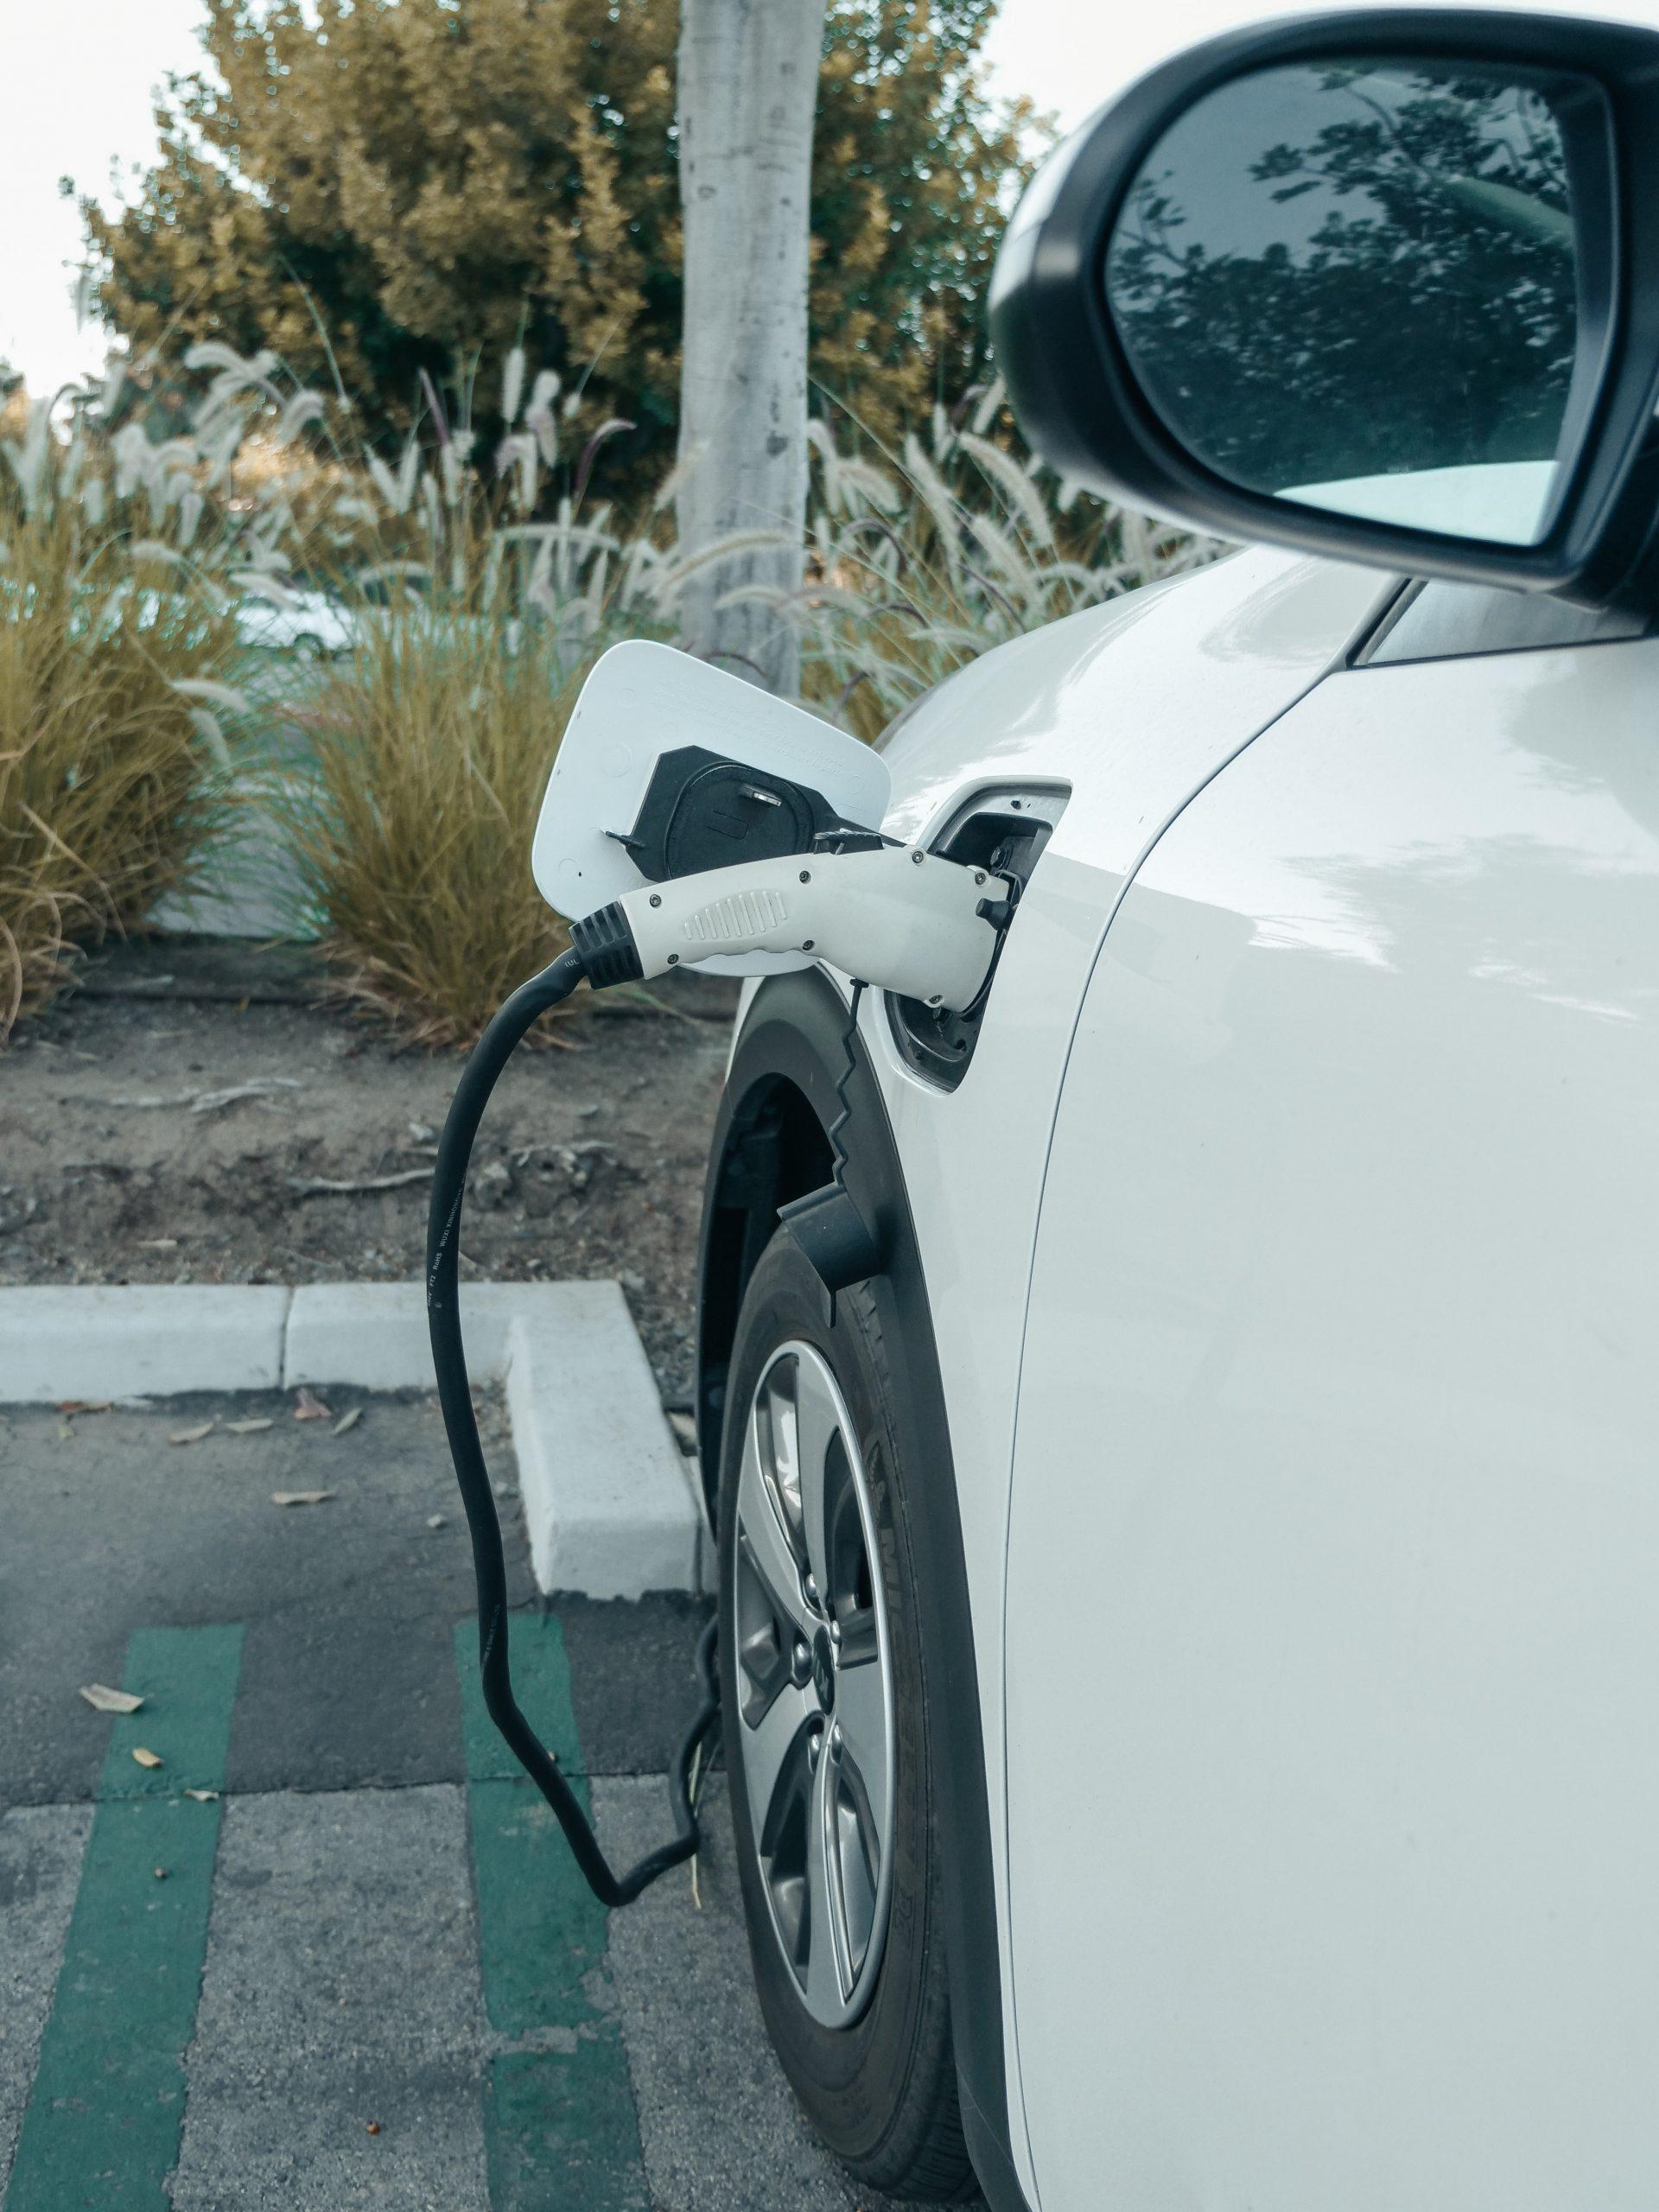 What To Know About The PSE&G Electric Vehicle Charging Rebate Program